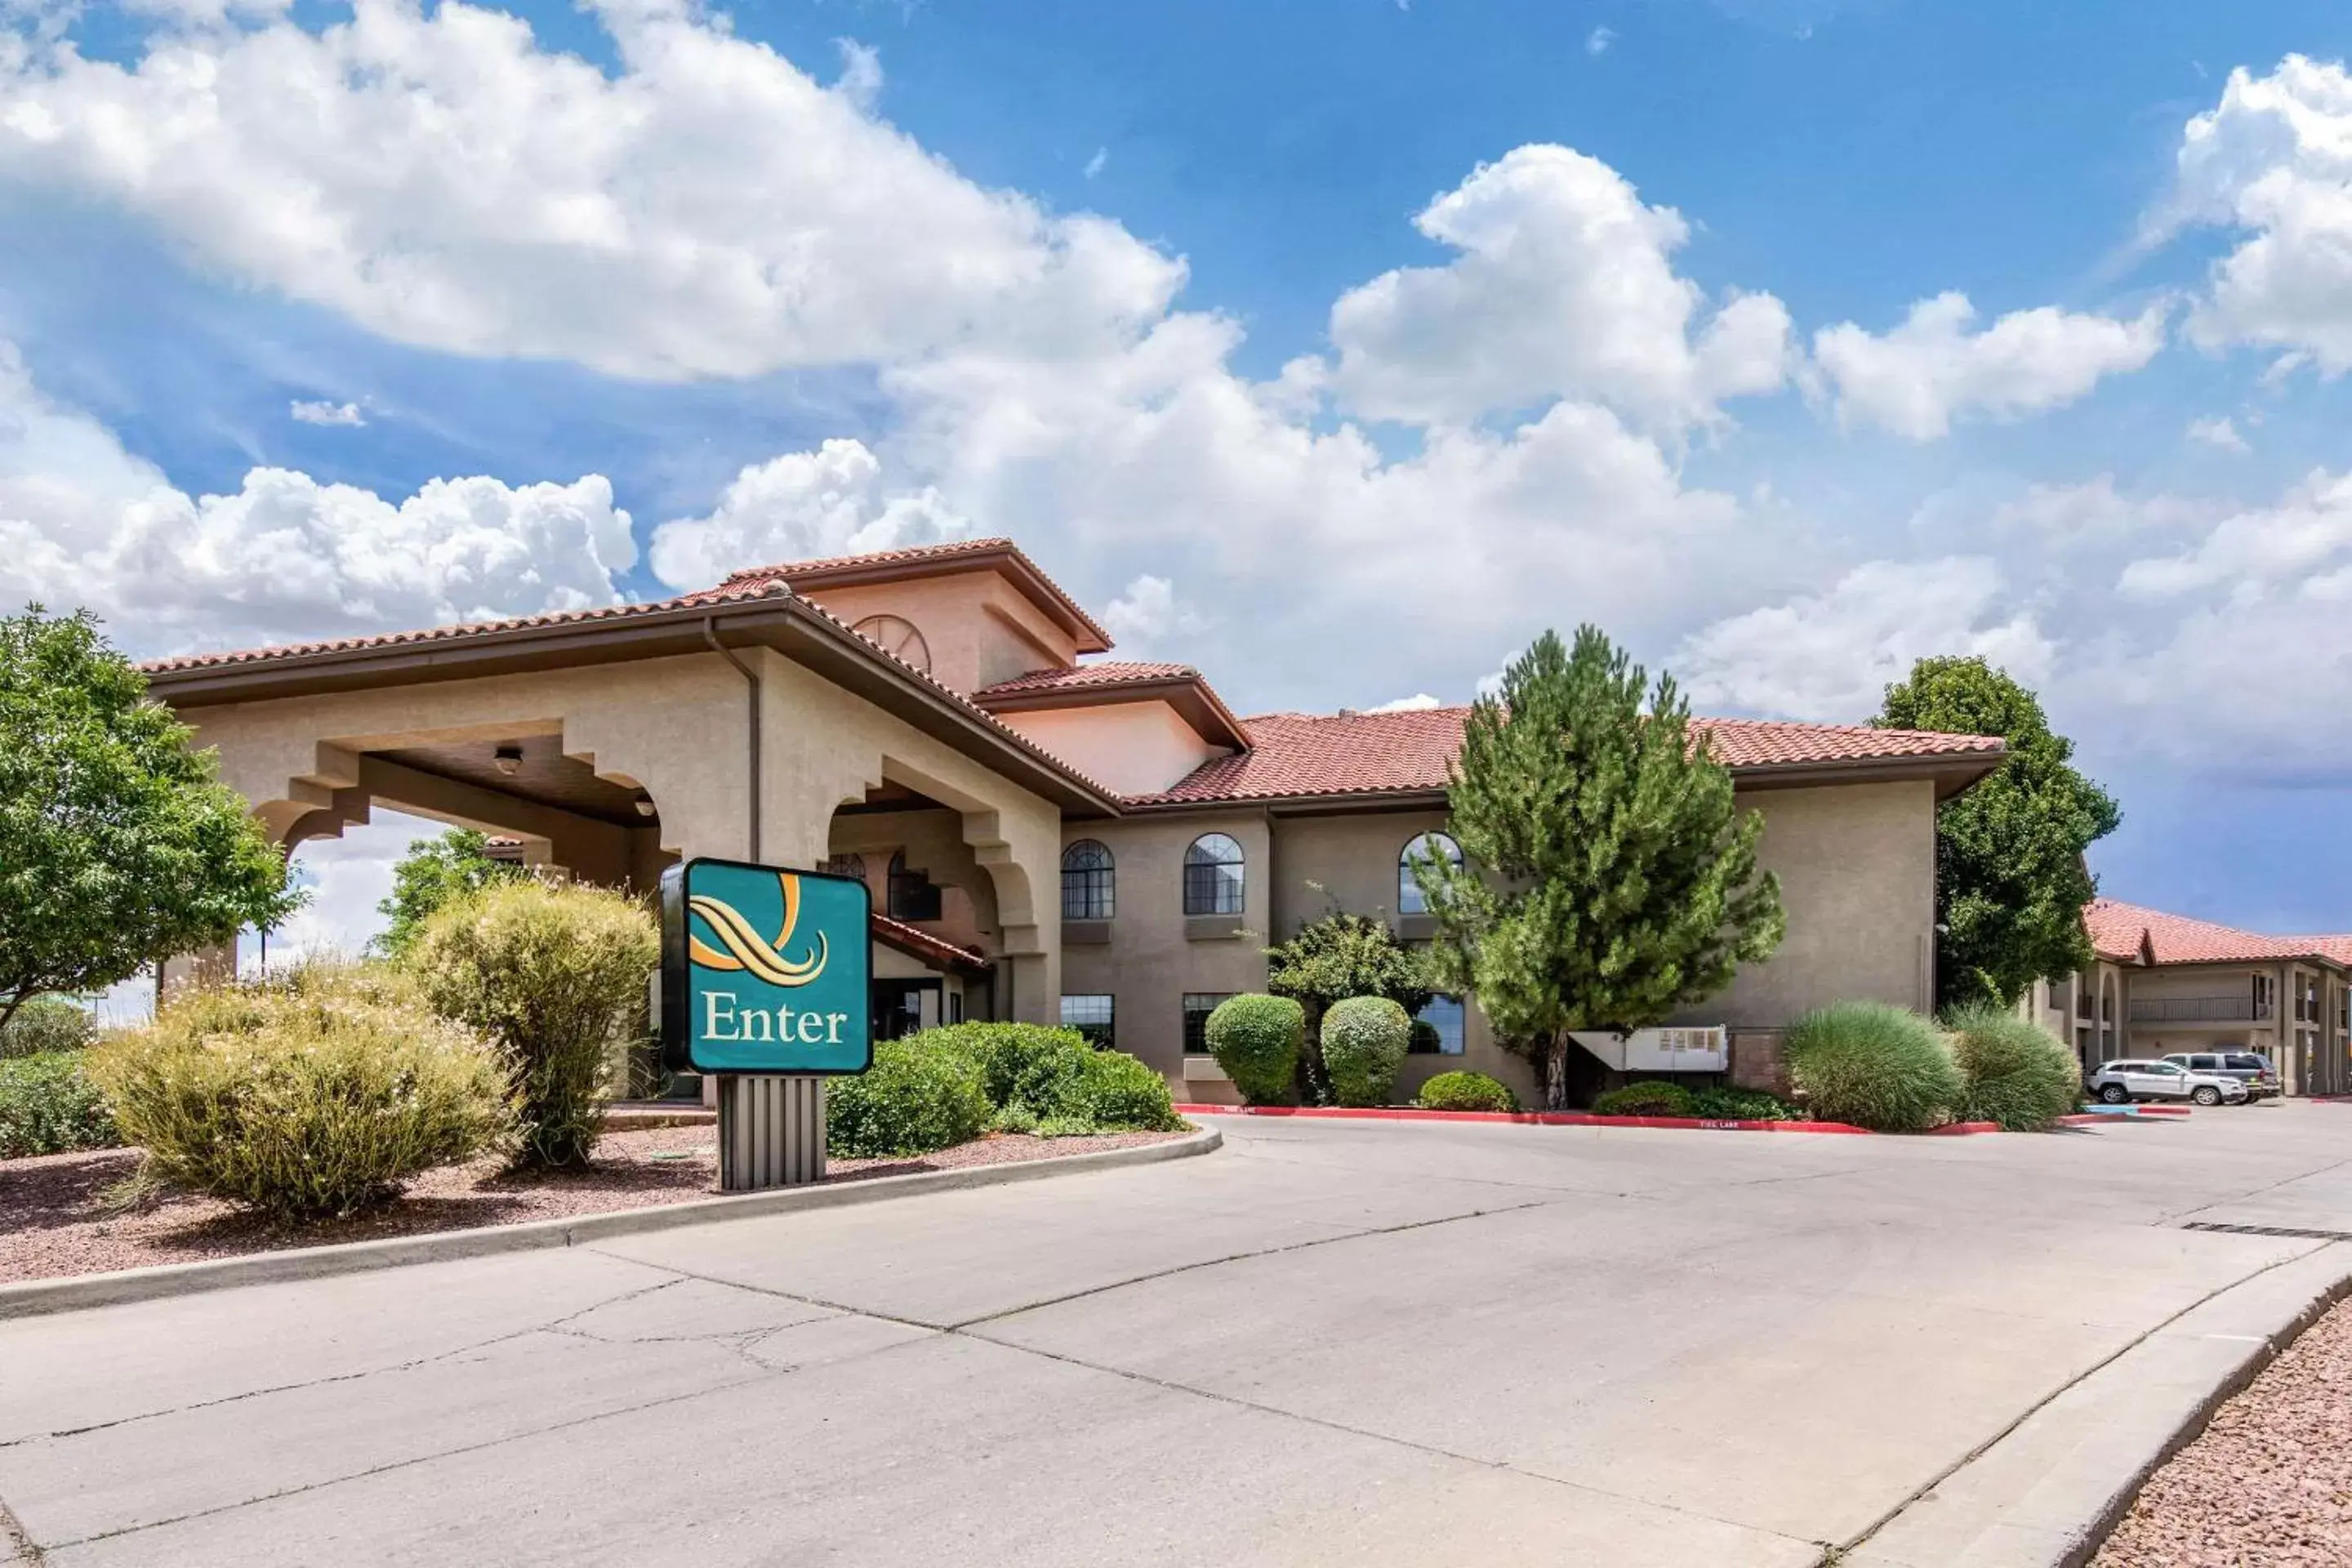 Property building in Quality Inn & Suites Gallup I-40 Exit 20